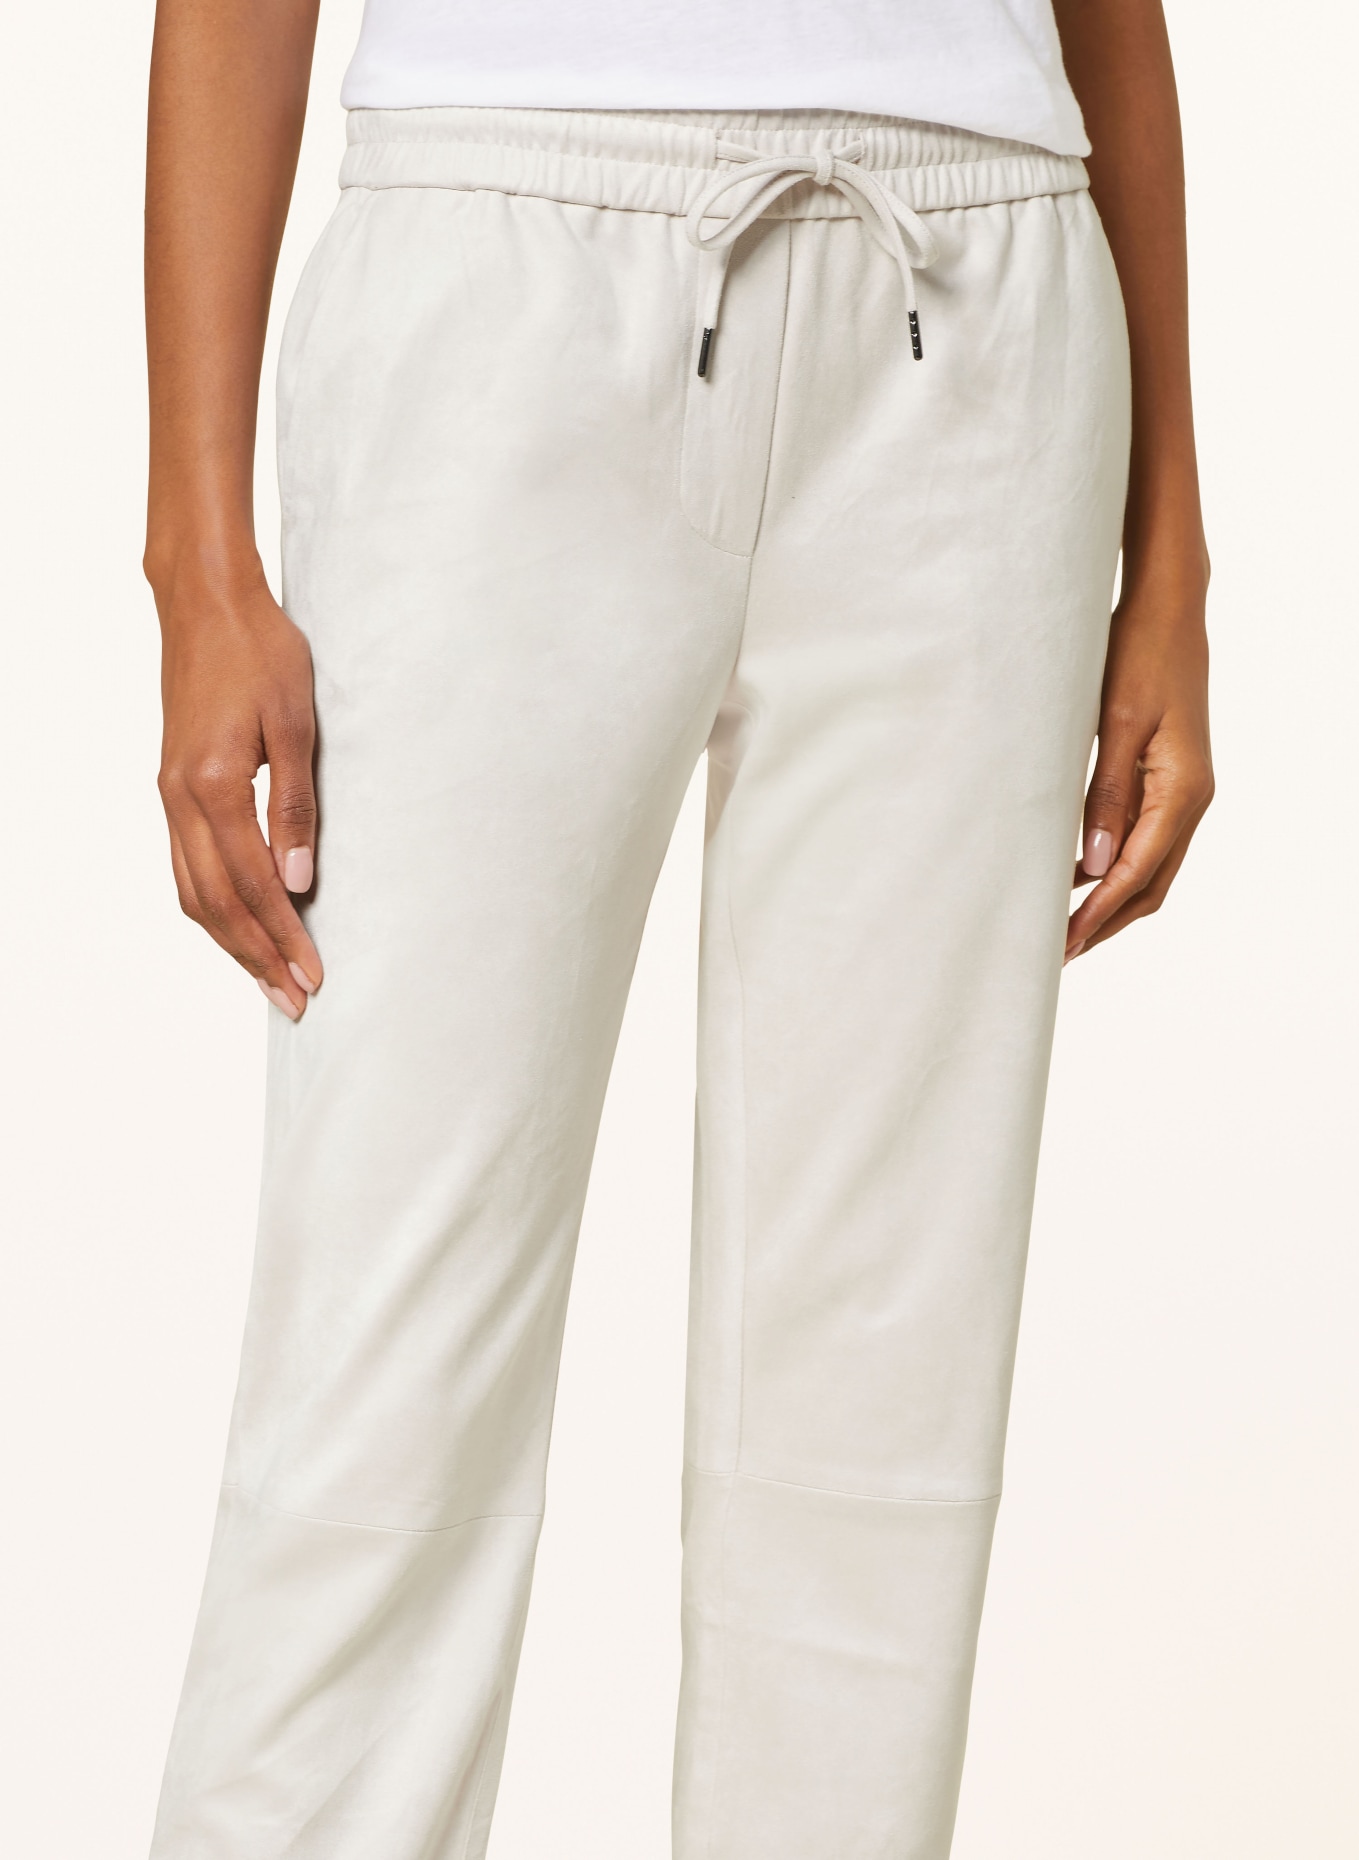 Juvia 7/8 trousers in leather look, Color: CREAM (Image 5)